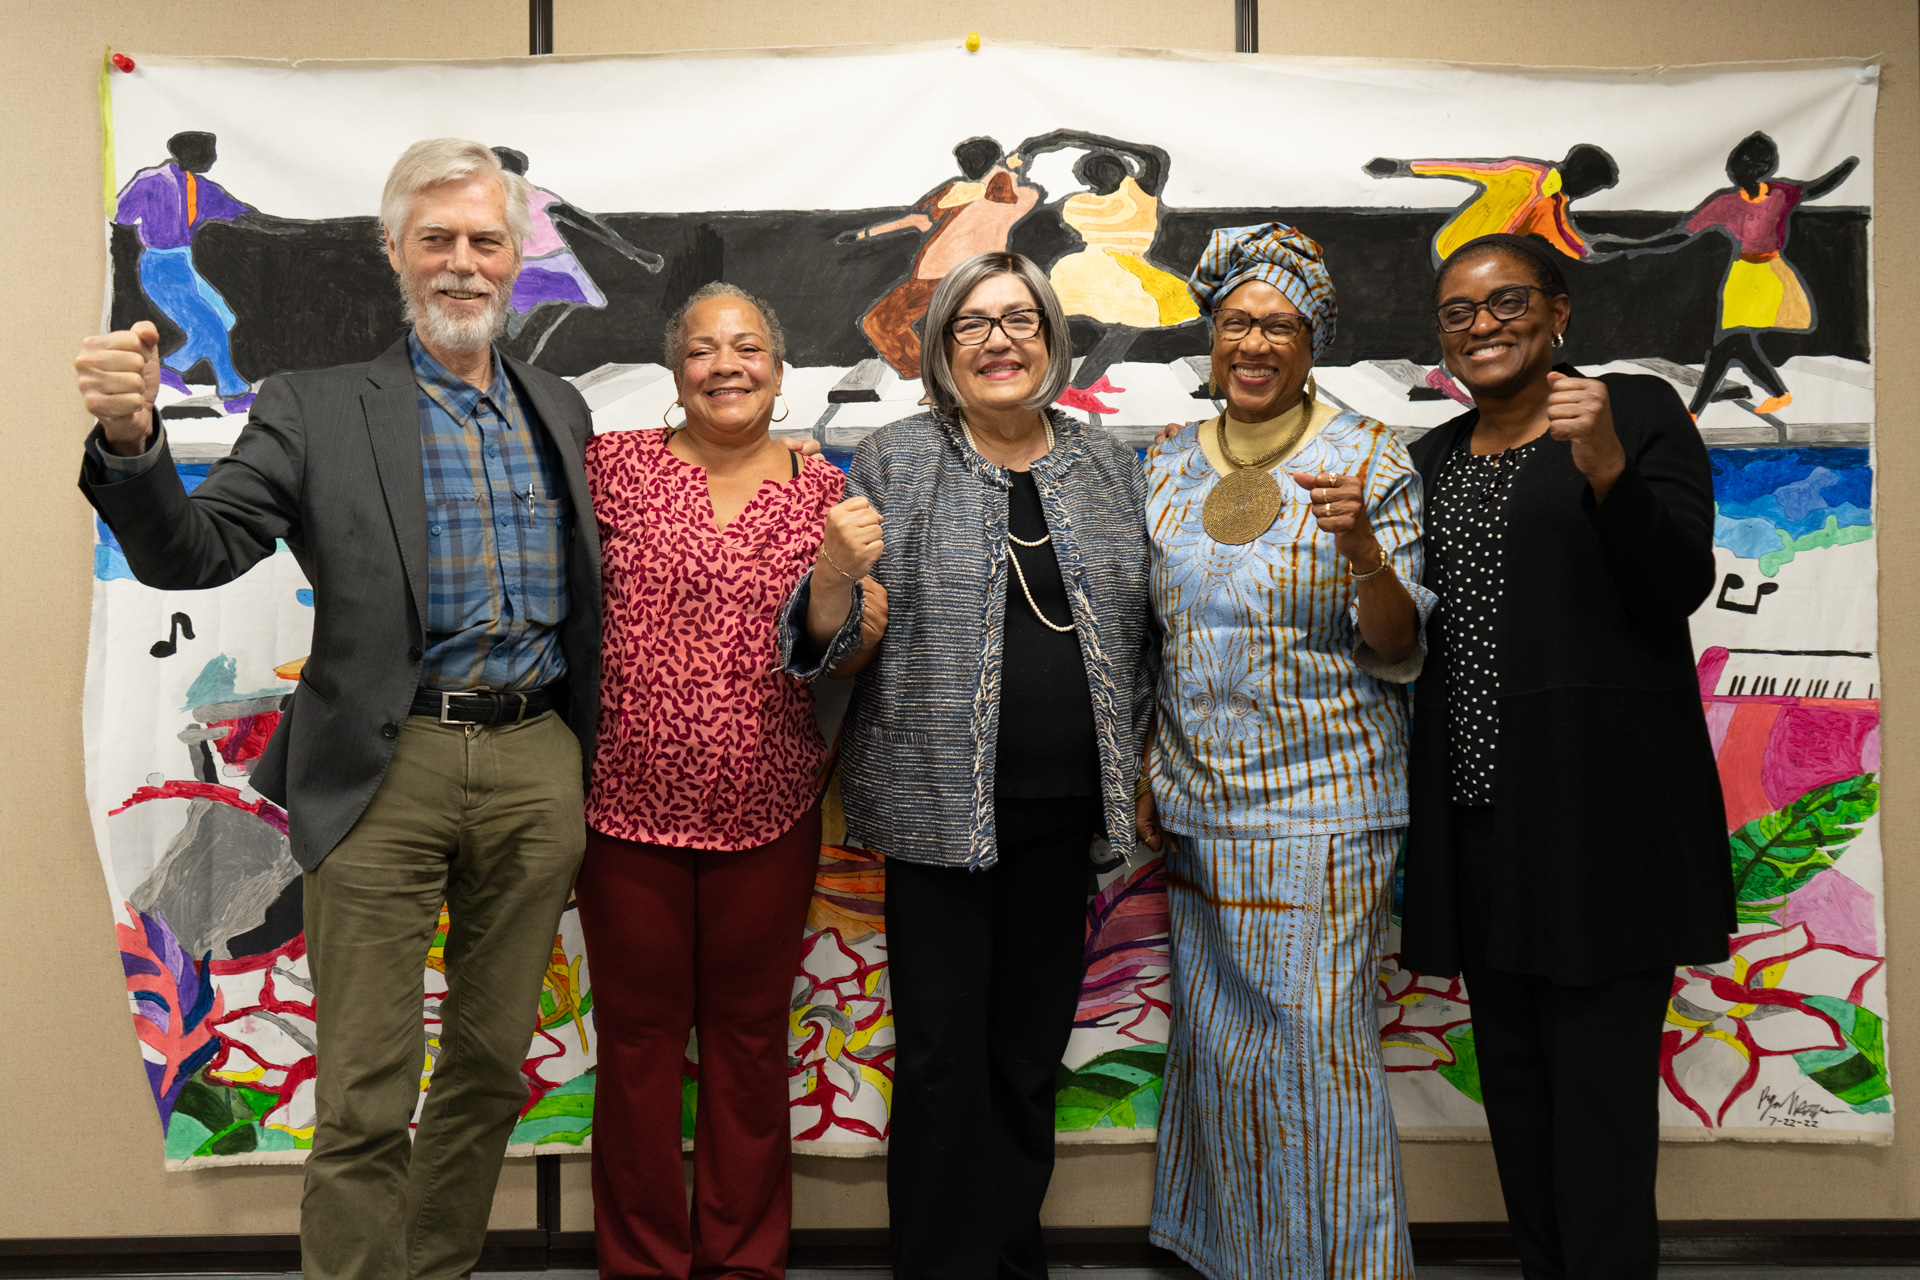 From Left to Right: Keith Norris, MD, Ph.D., Anna Ziza Lucas Varnado, Dr. Laura Trejo; Norma Mtume and Arleen F. Brown, M.D., Ph.D.